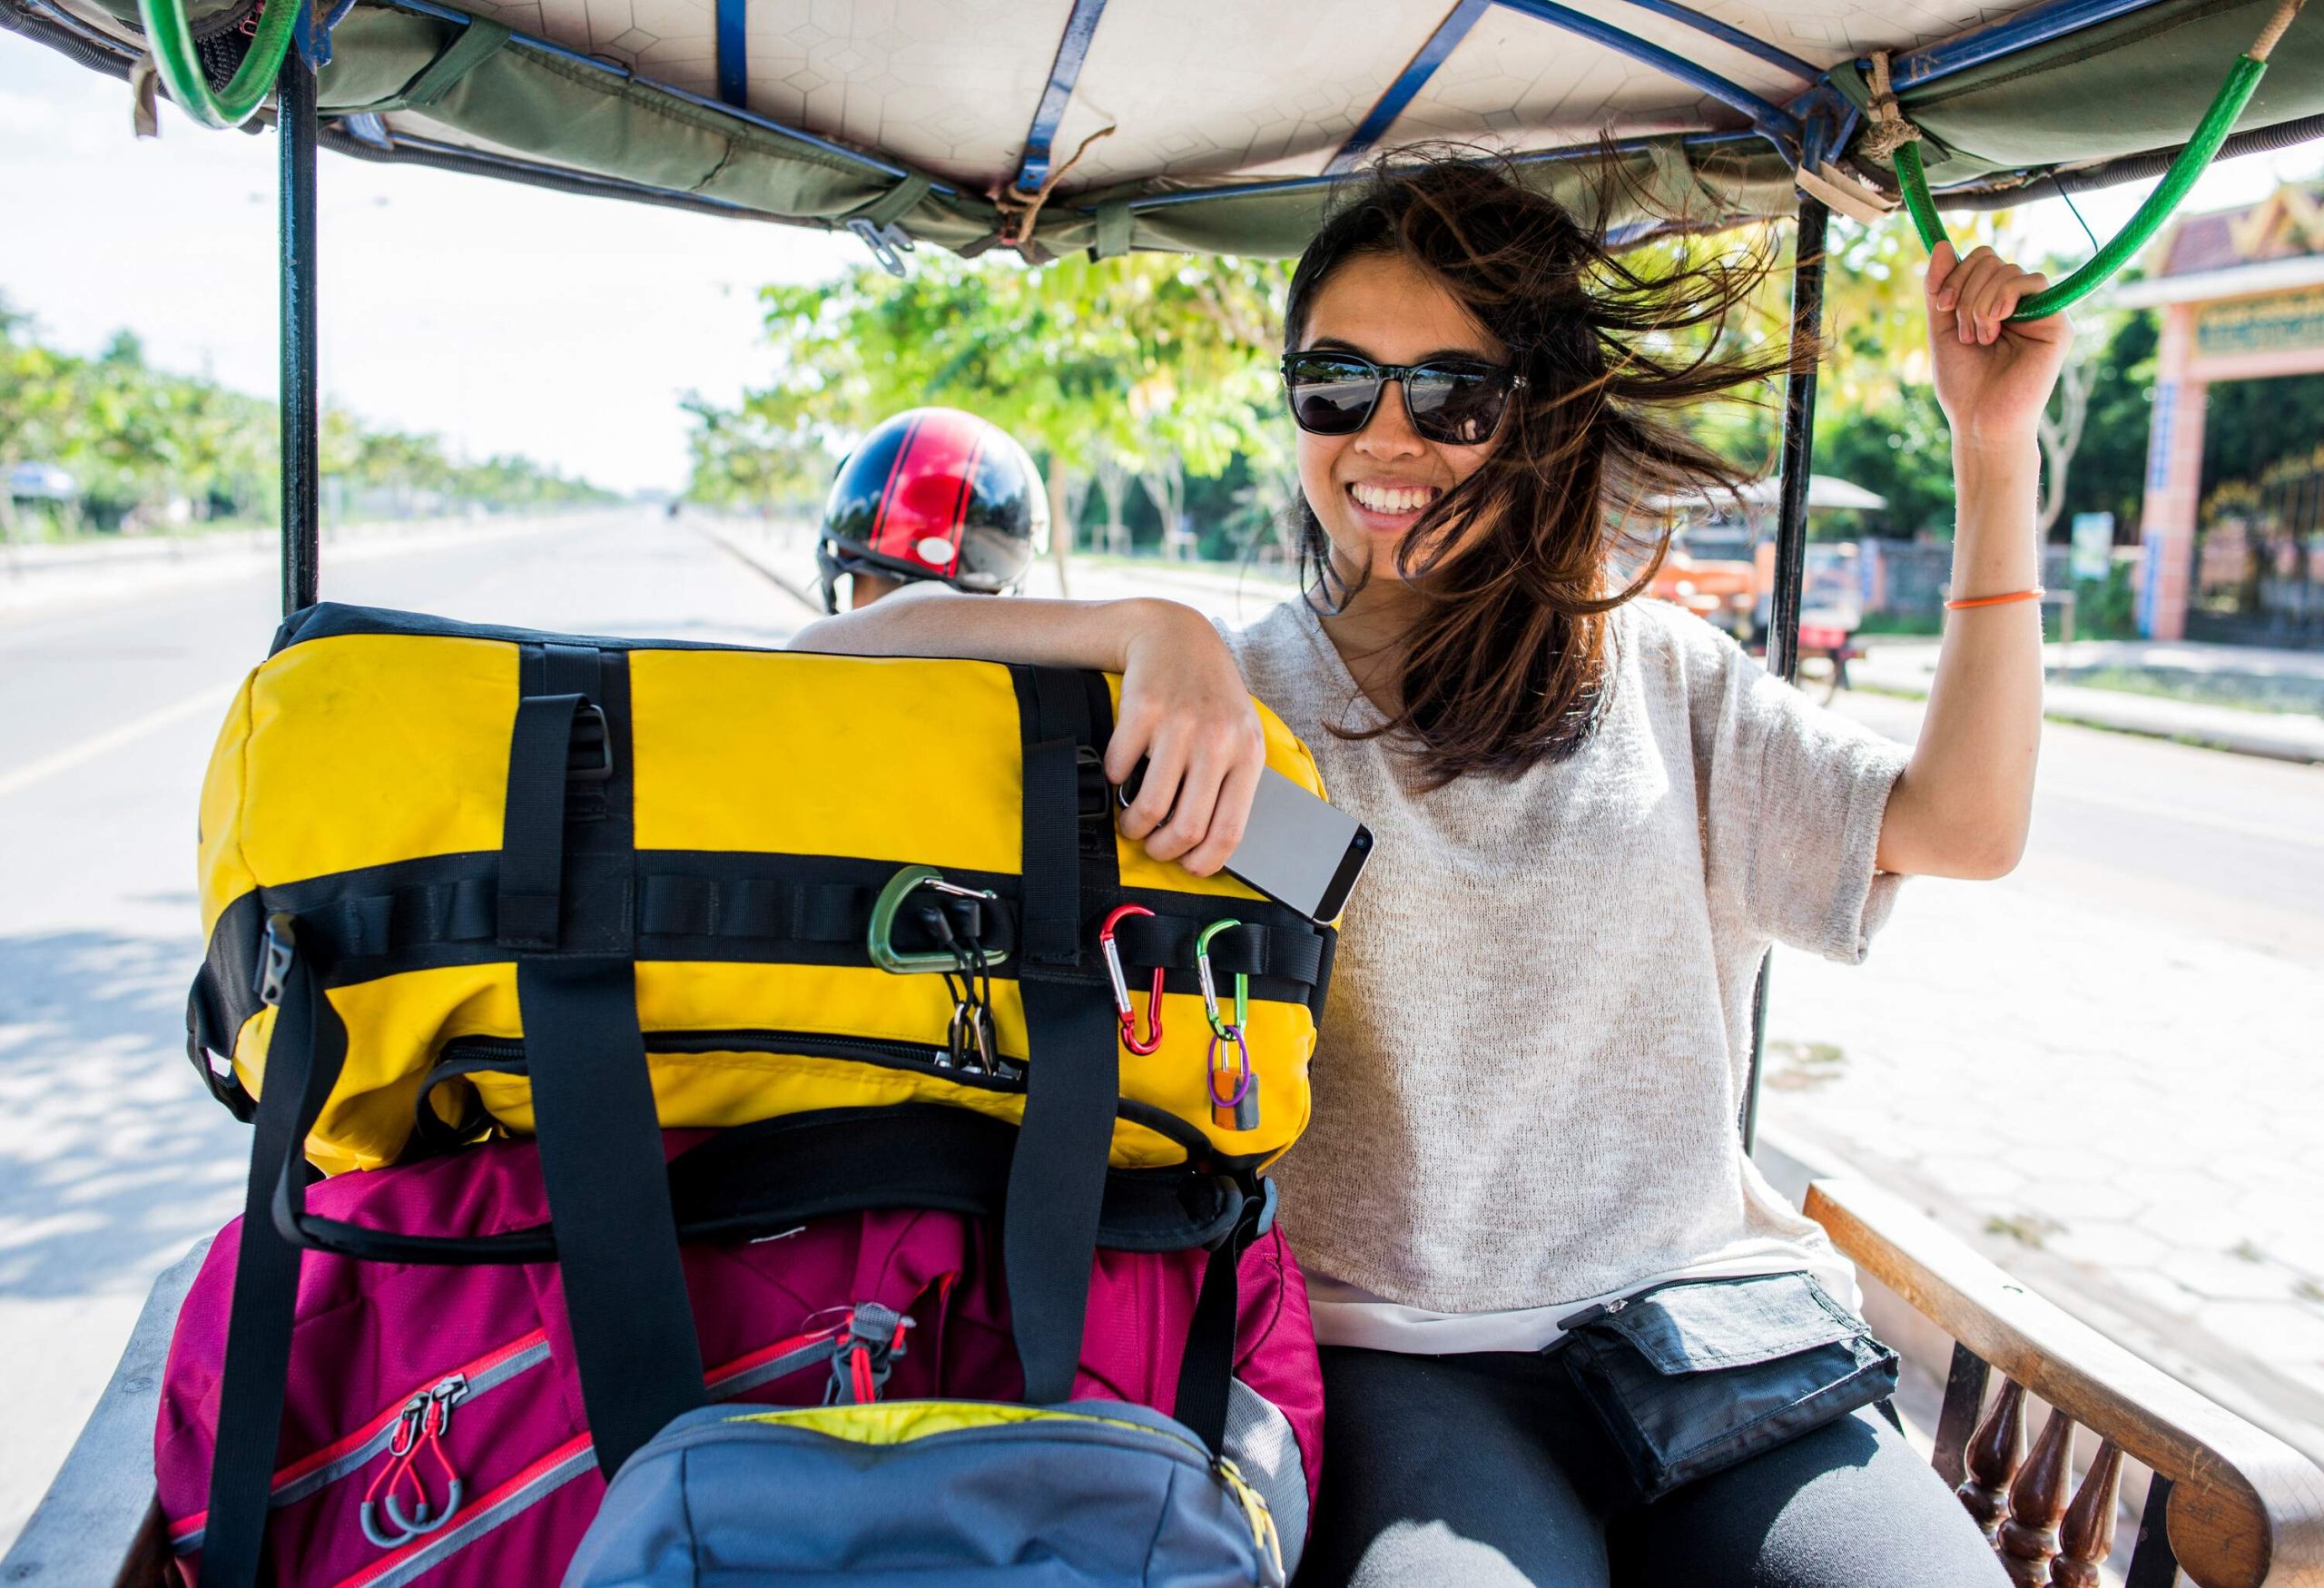 A woman in sunglasses and casual clothes smiles as she rides at the back of a vehicle with a pile of luggage.